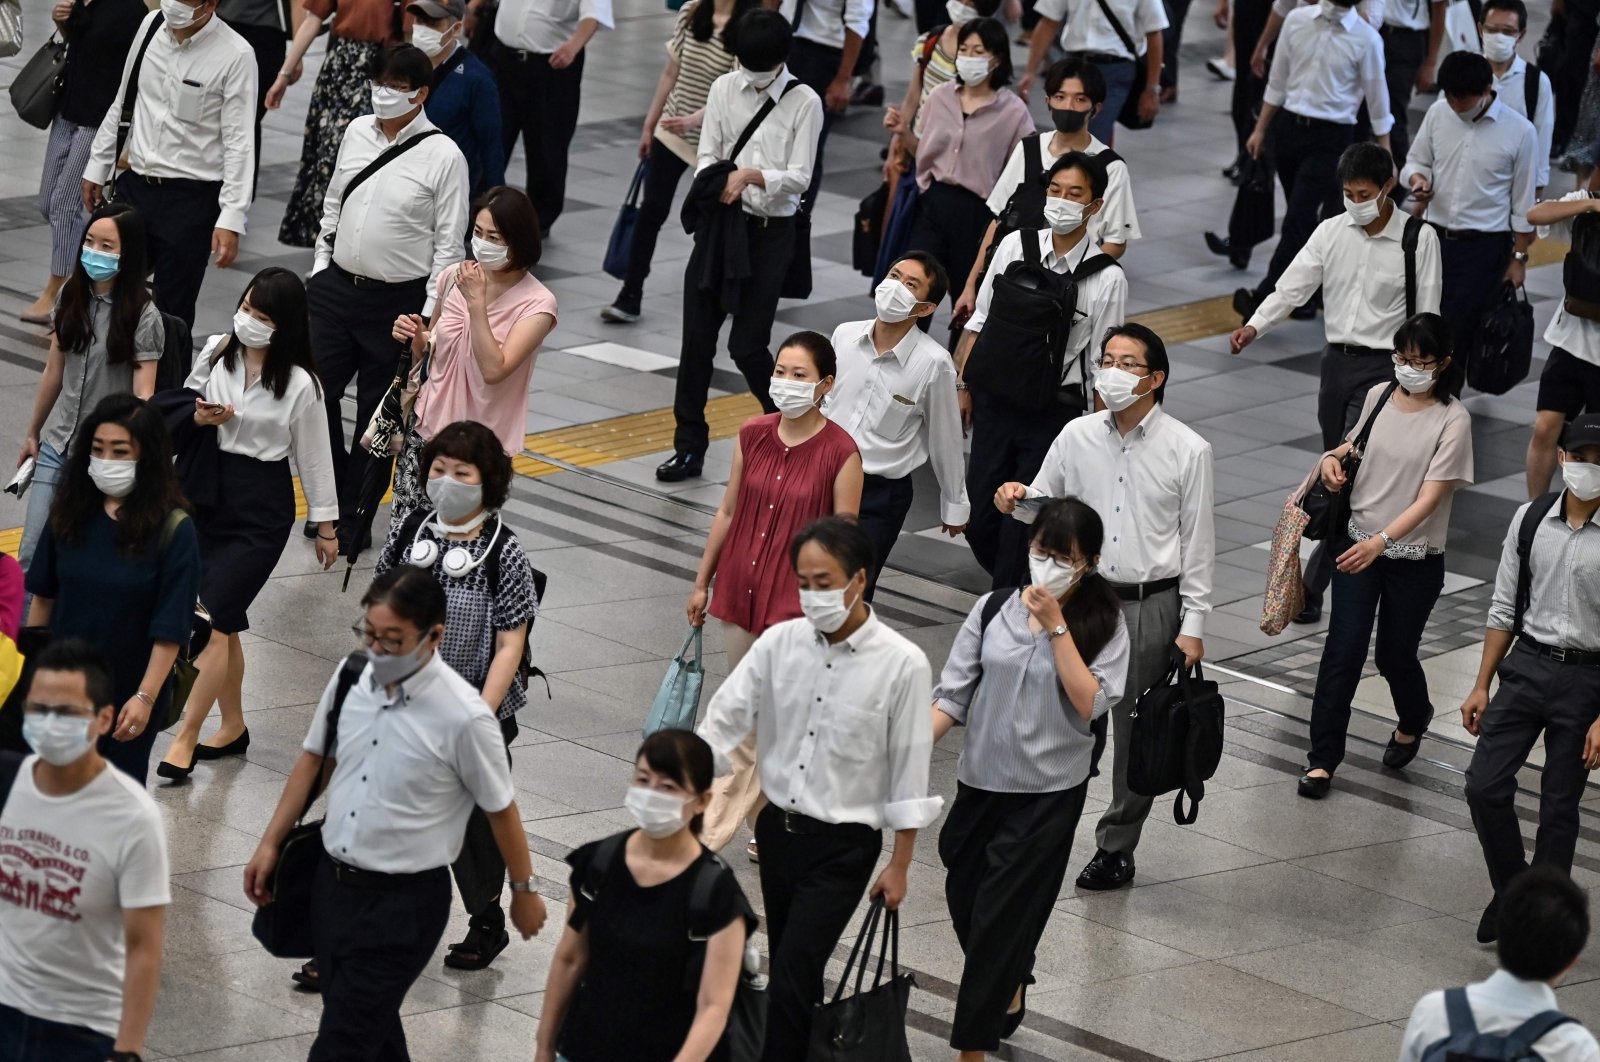 People commute on an early morning in Tokyo, Japan, Aug. 17, 2020. (AFP Photo)